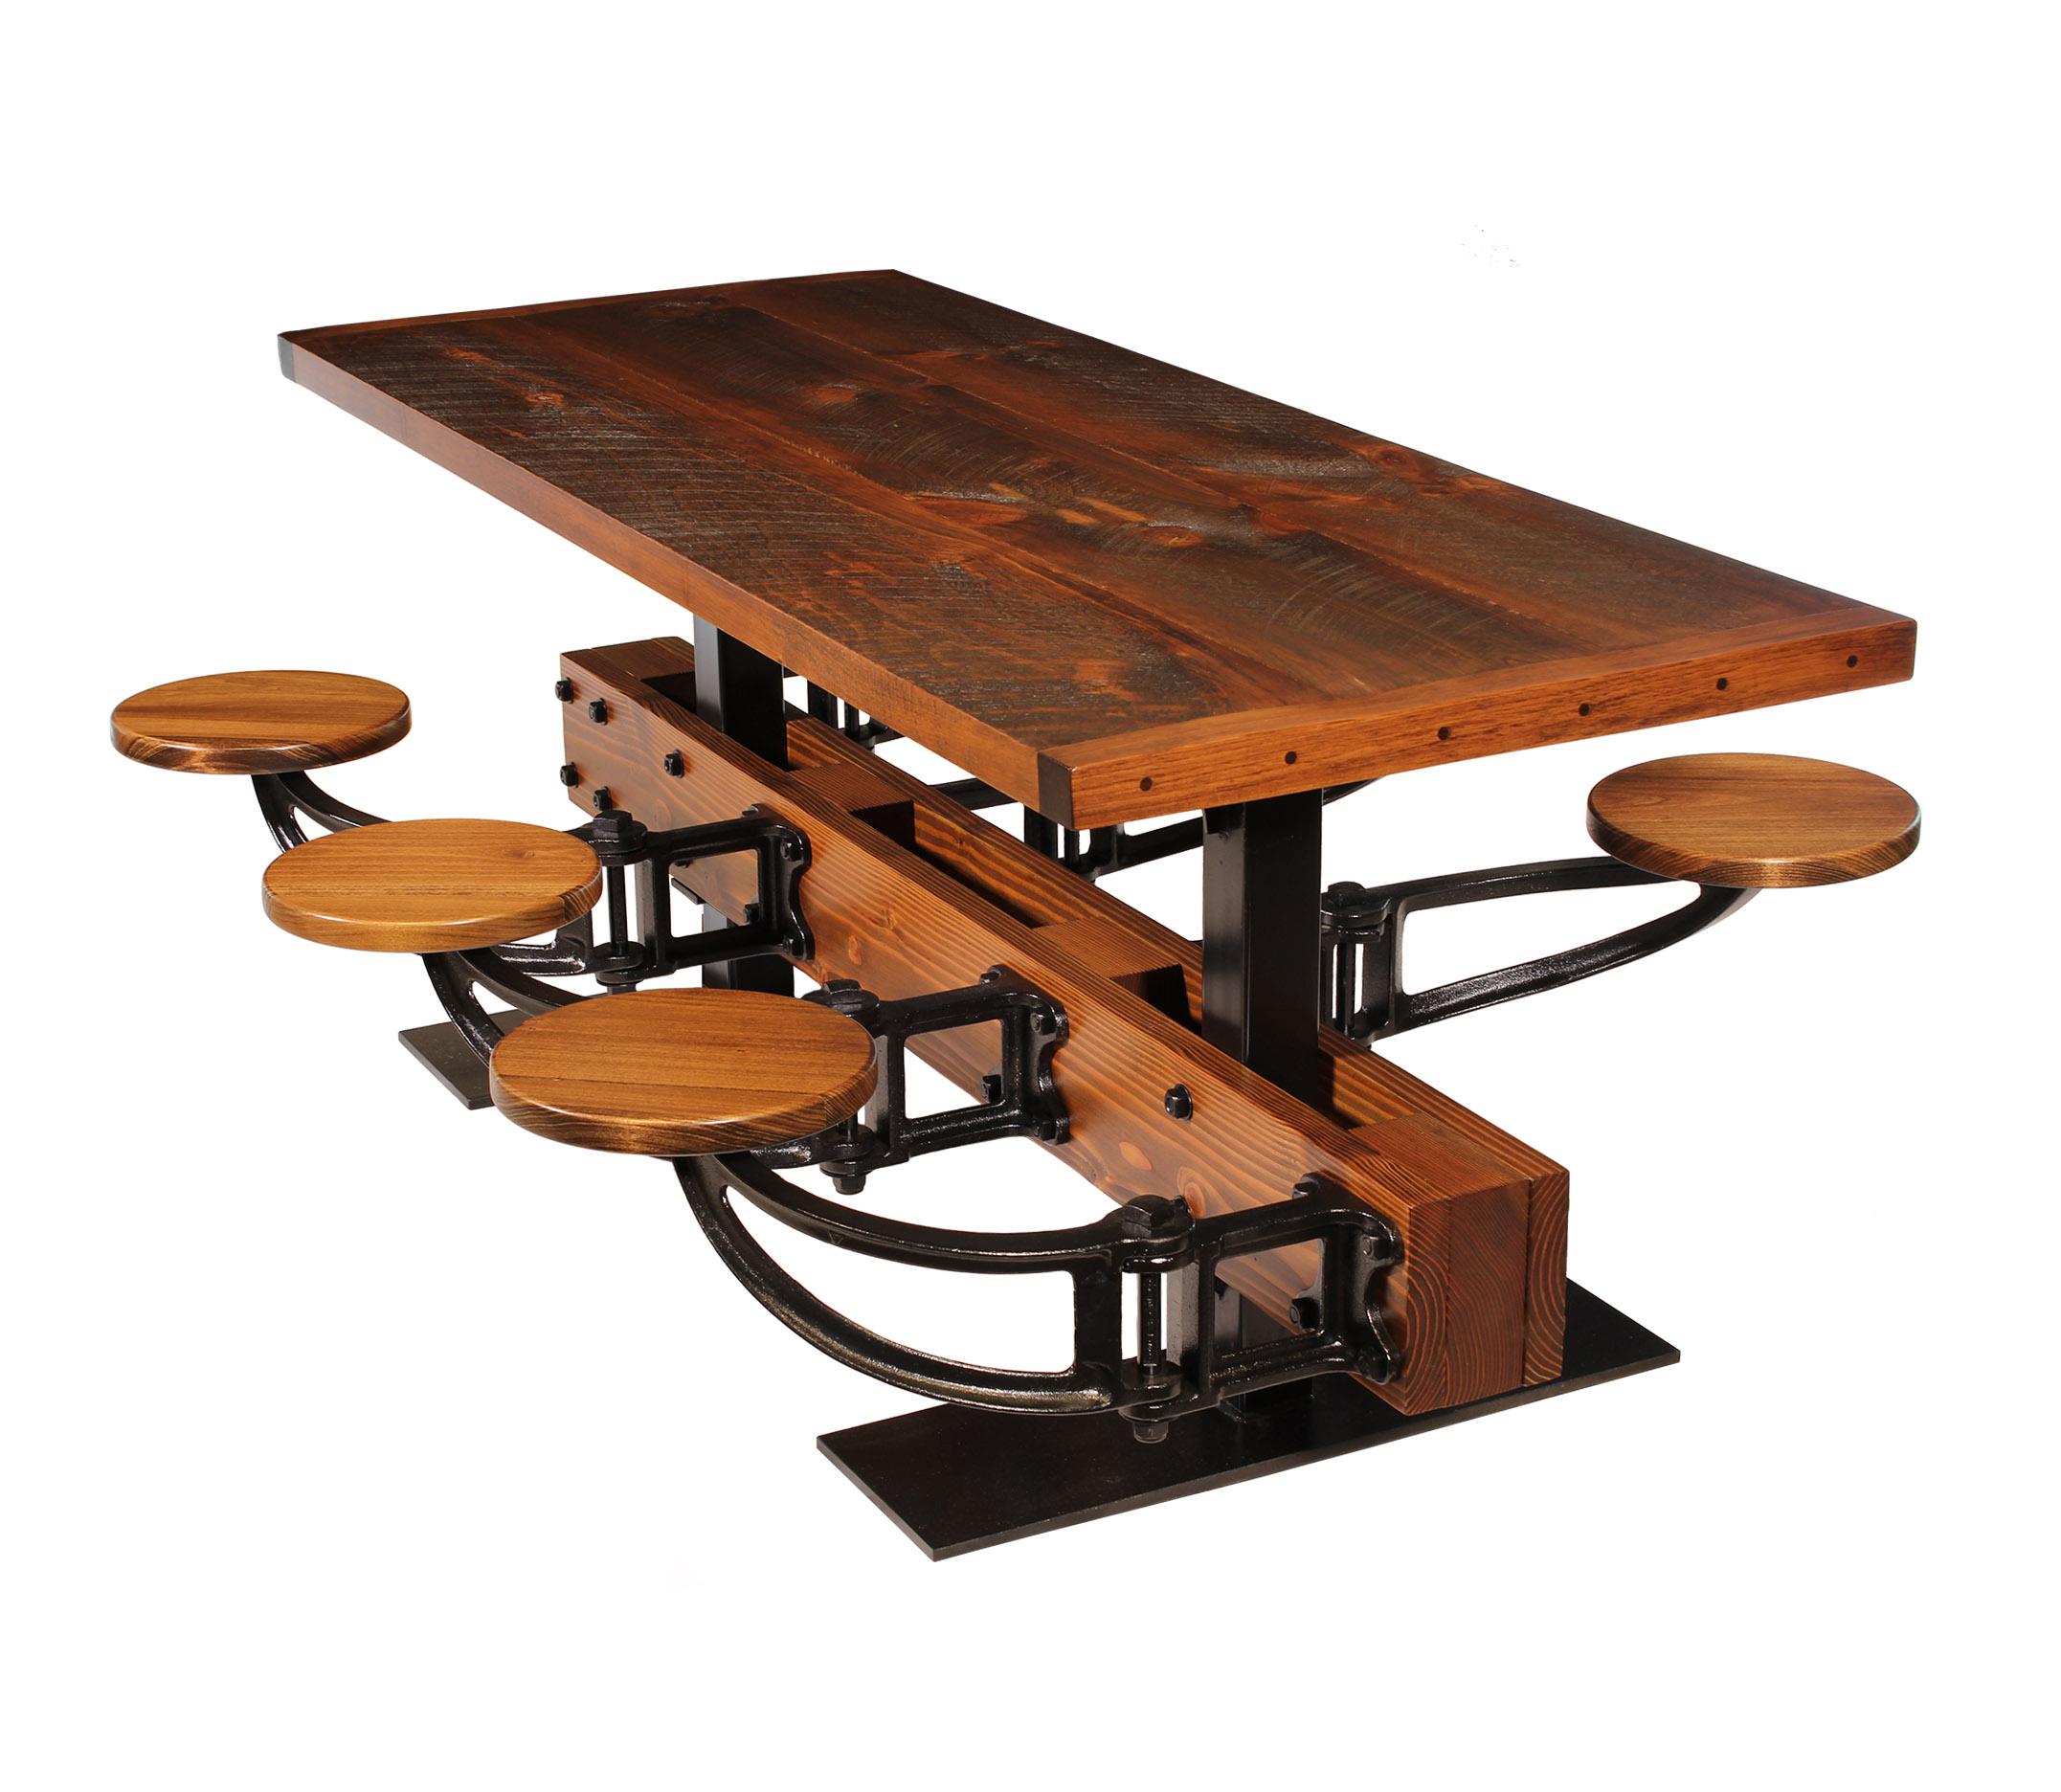 Industrial cast iron and wood swing out seat dining table set. Seats are cast from ductile iron and are stress tested to over 1000 pounds. Model shown with a 